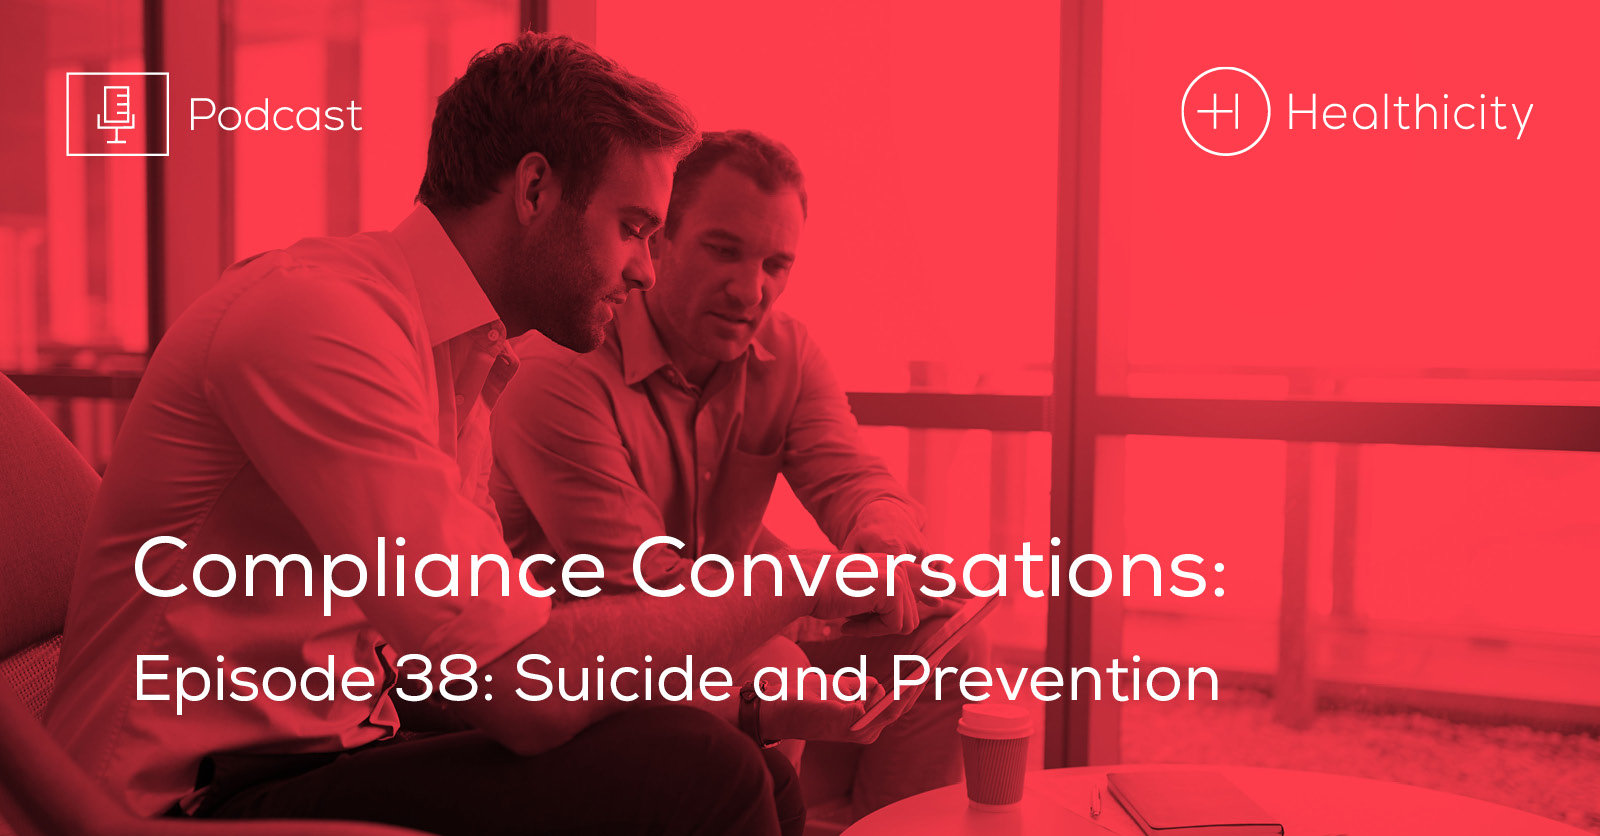 Listen to the Episode - Suicide and Prevention